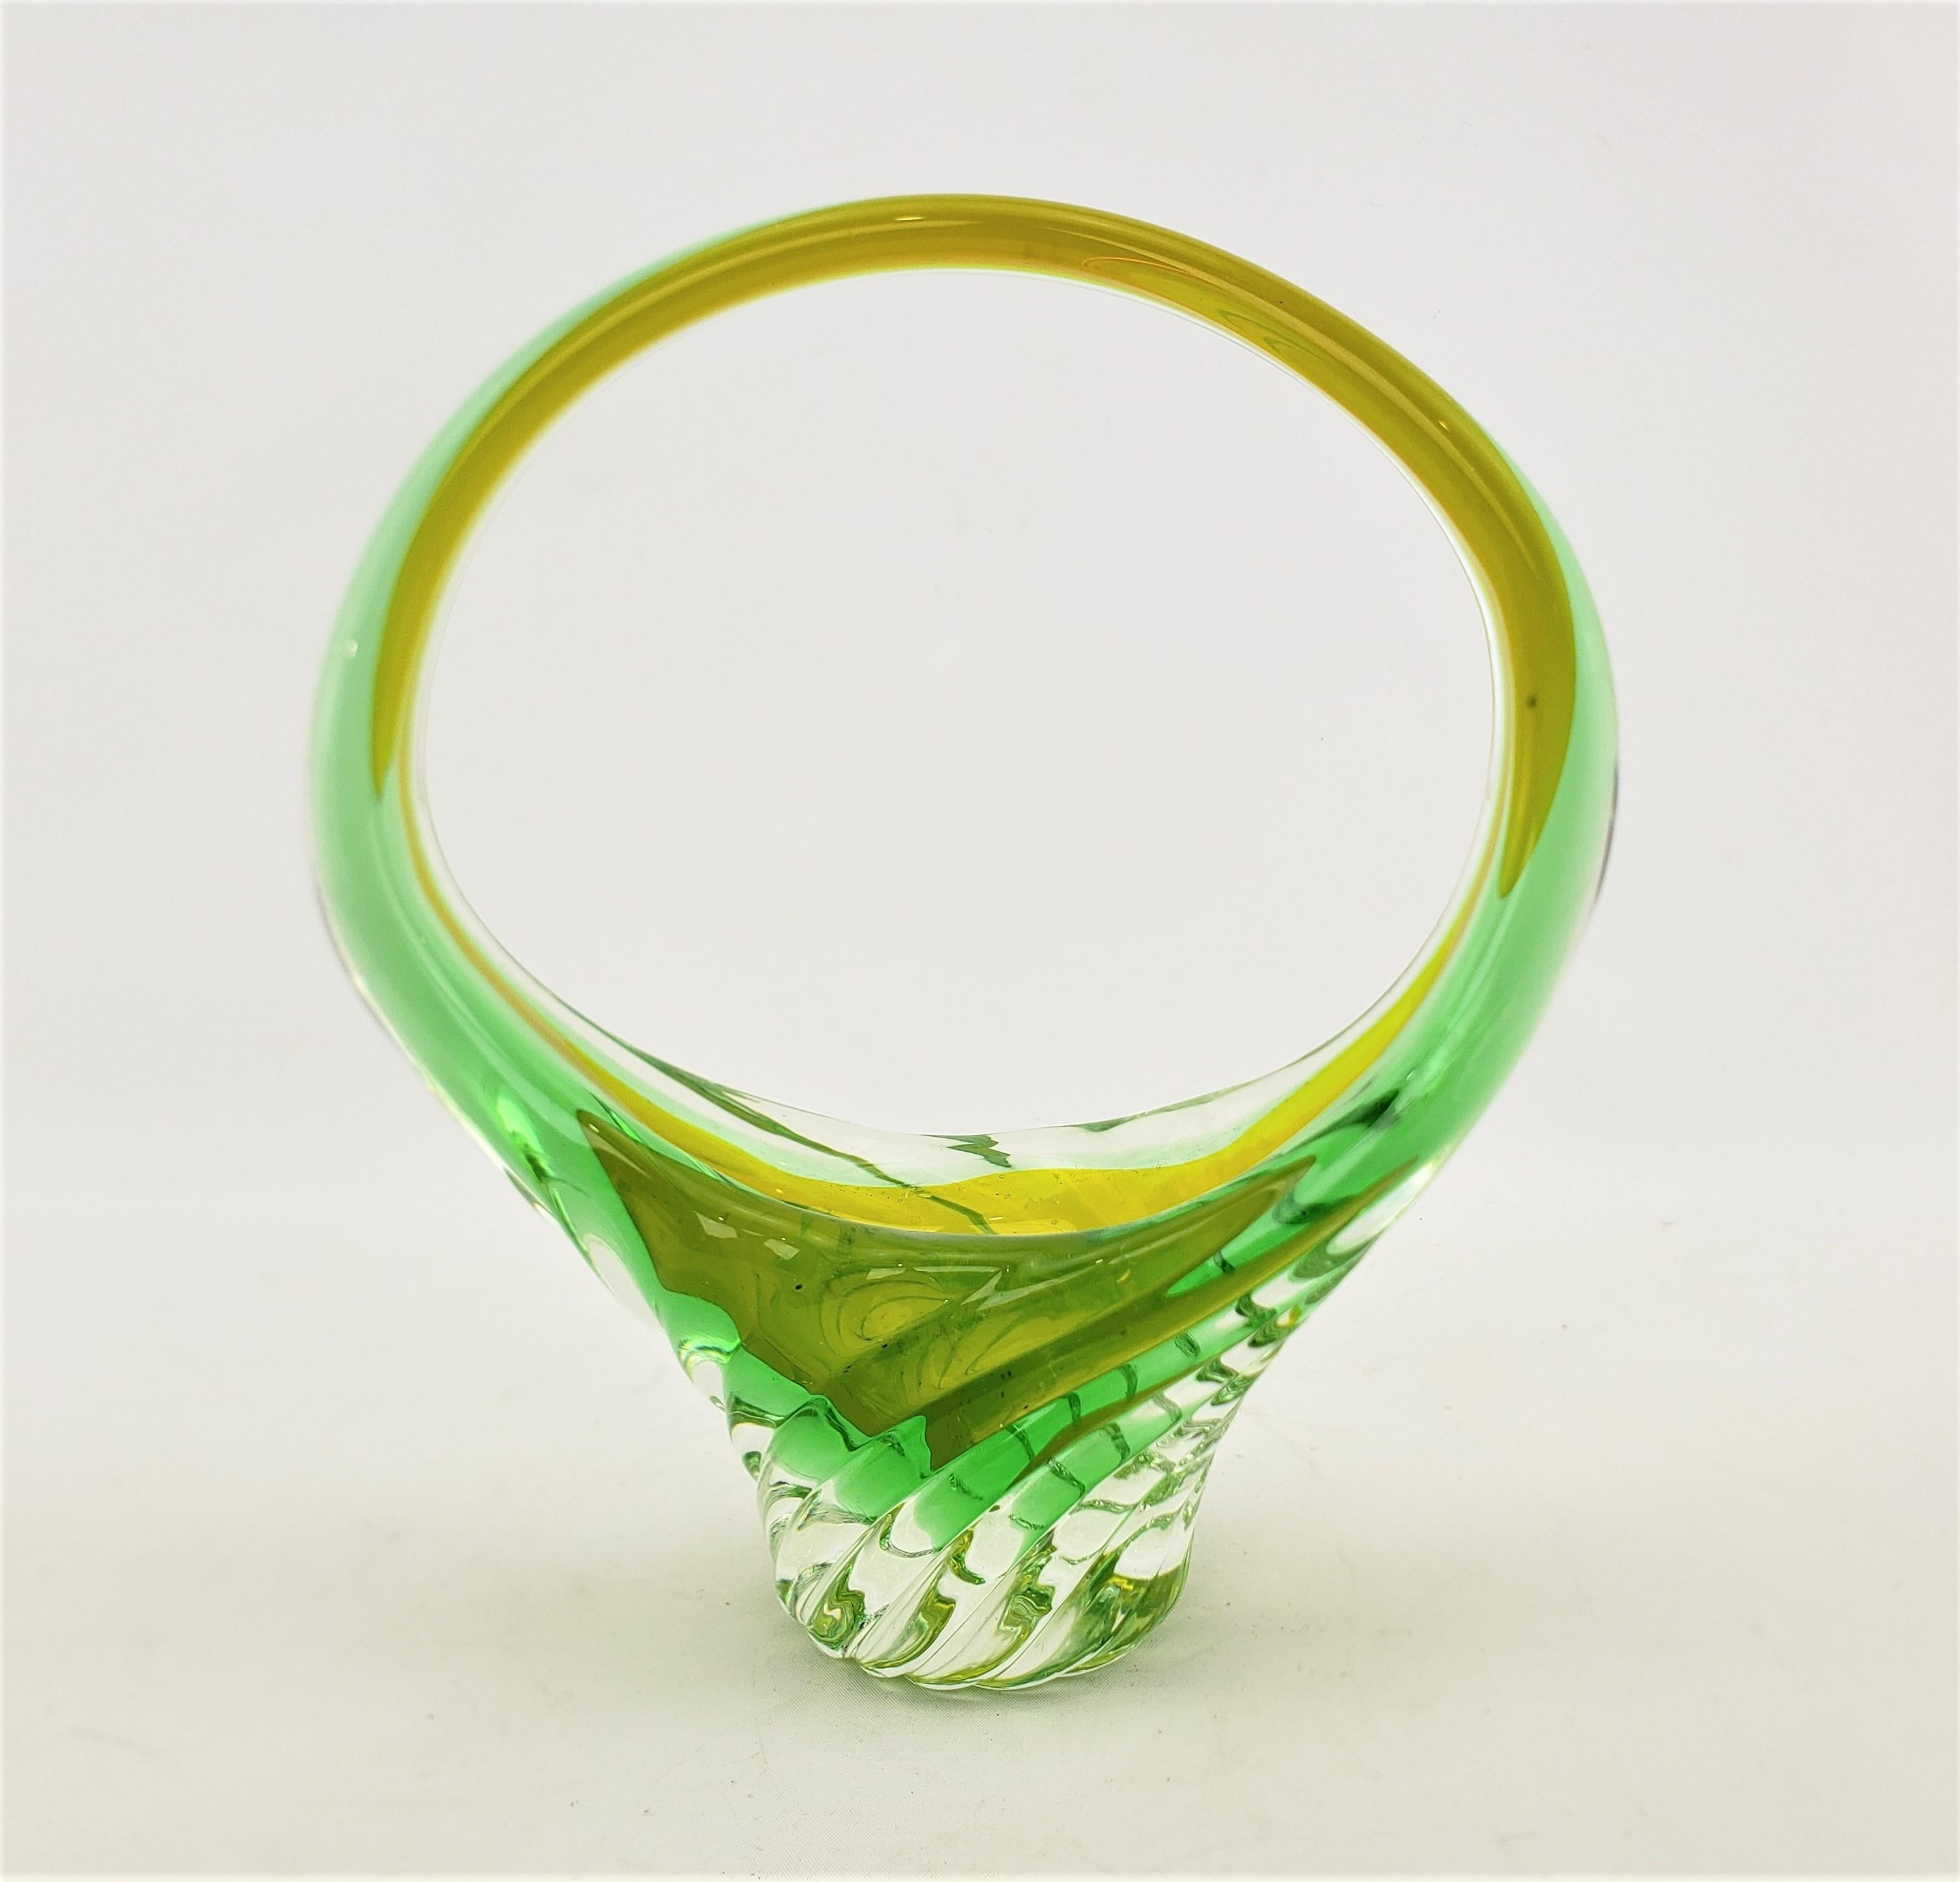 This art glass basket styled vase is unsigned, but presumed to have originated from Murano Italy and dating to approximately 1965 and done in the period Mid-Century Modern style. The vase is done with a thick clear glass with two submerged bands,